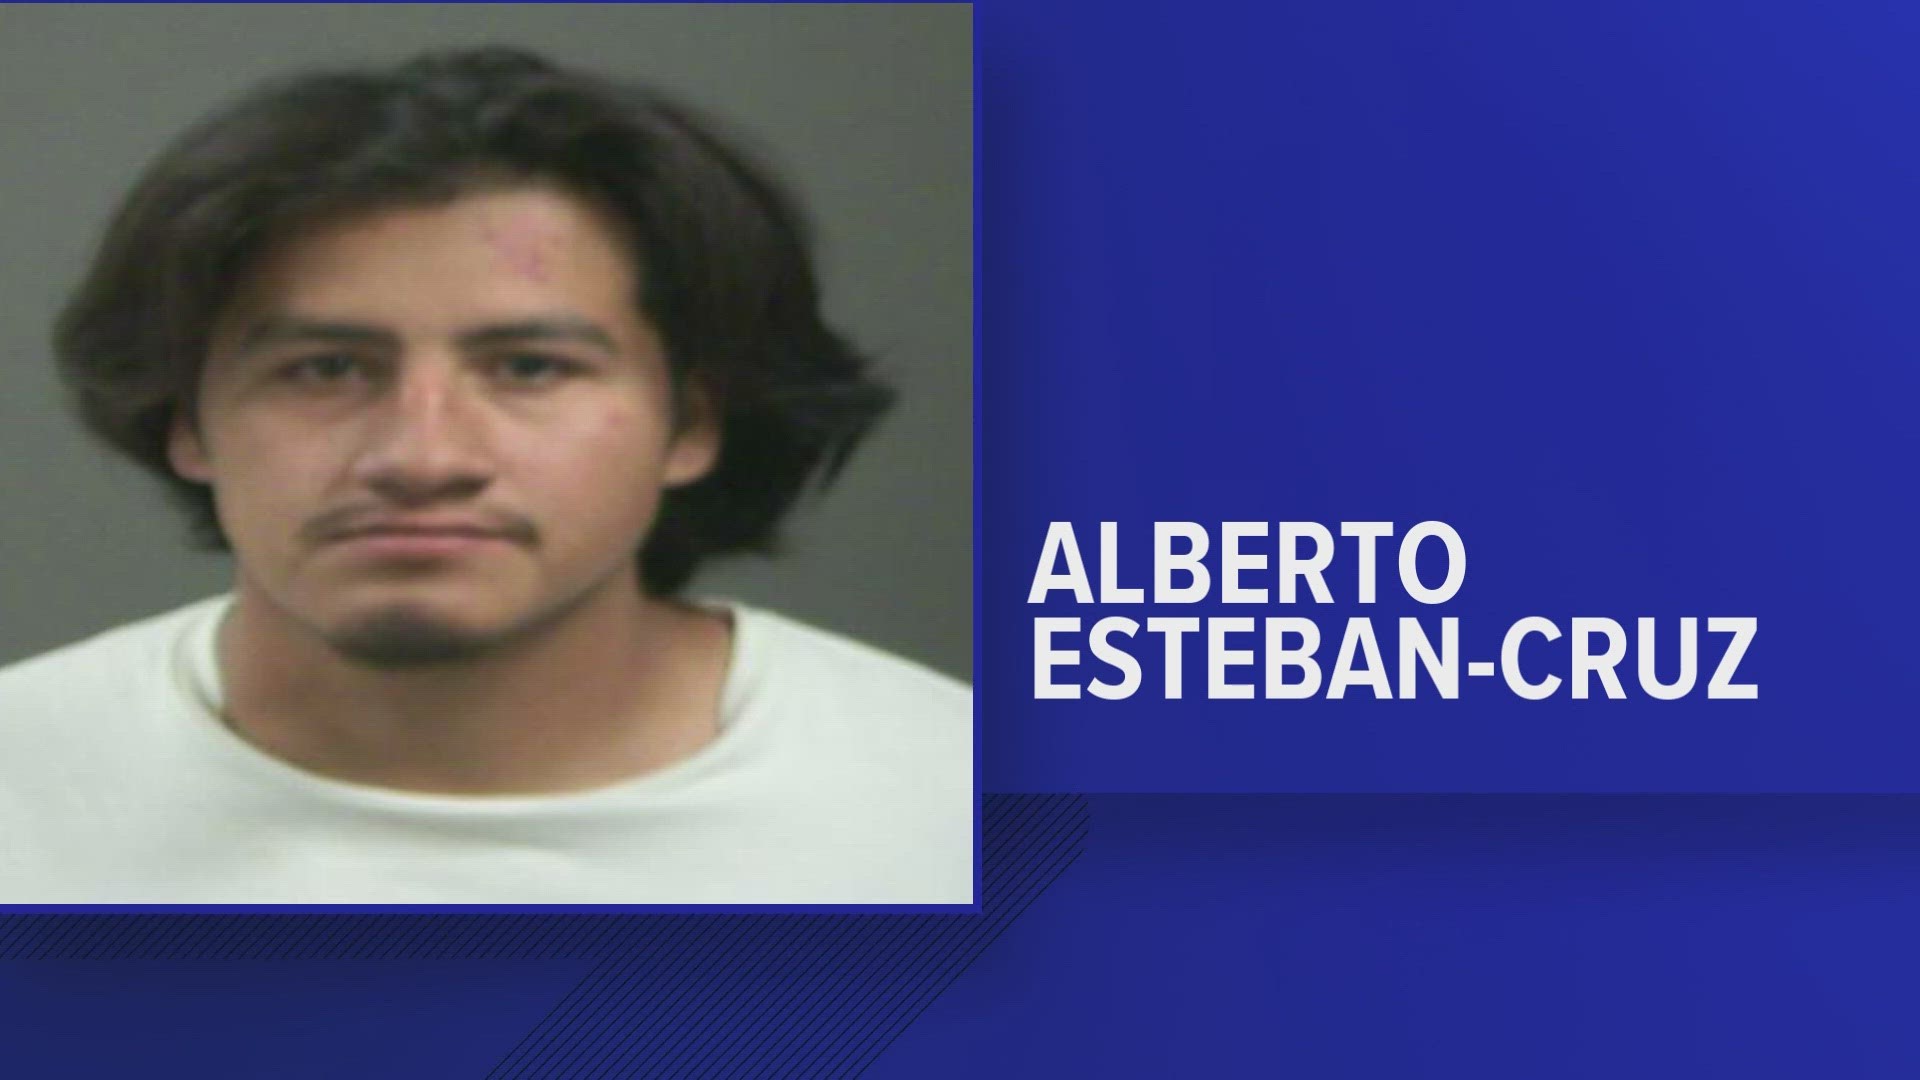 Alberto Esteban-Cruz was arrested for attempted murder in connection to a Lake Fayetteville shooting that killed one and injured four in February.